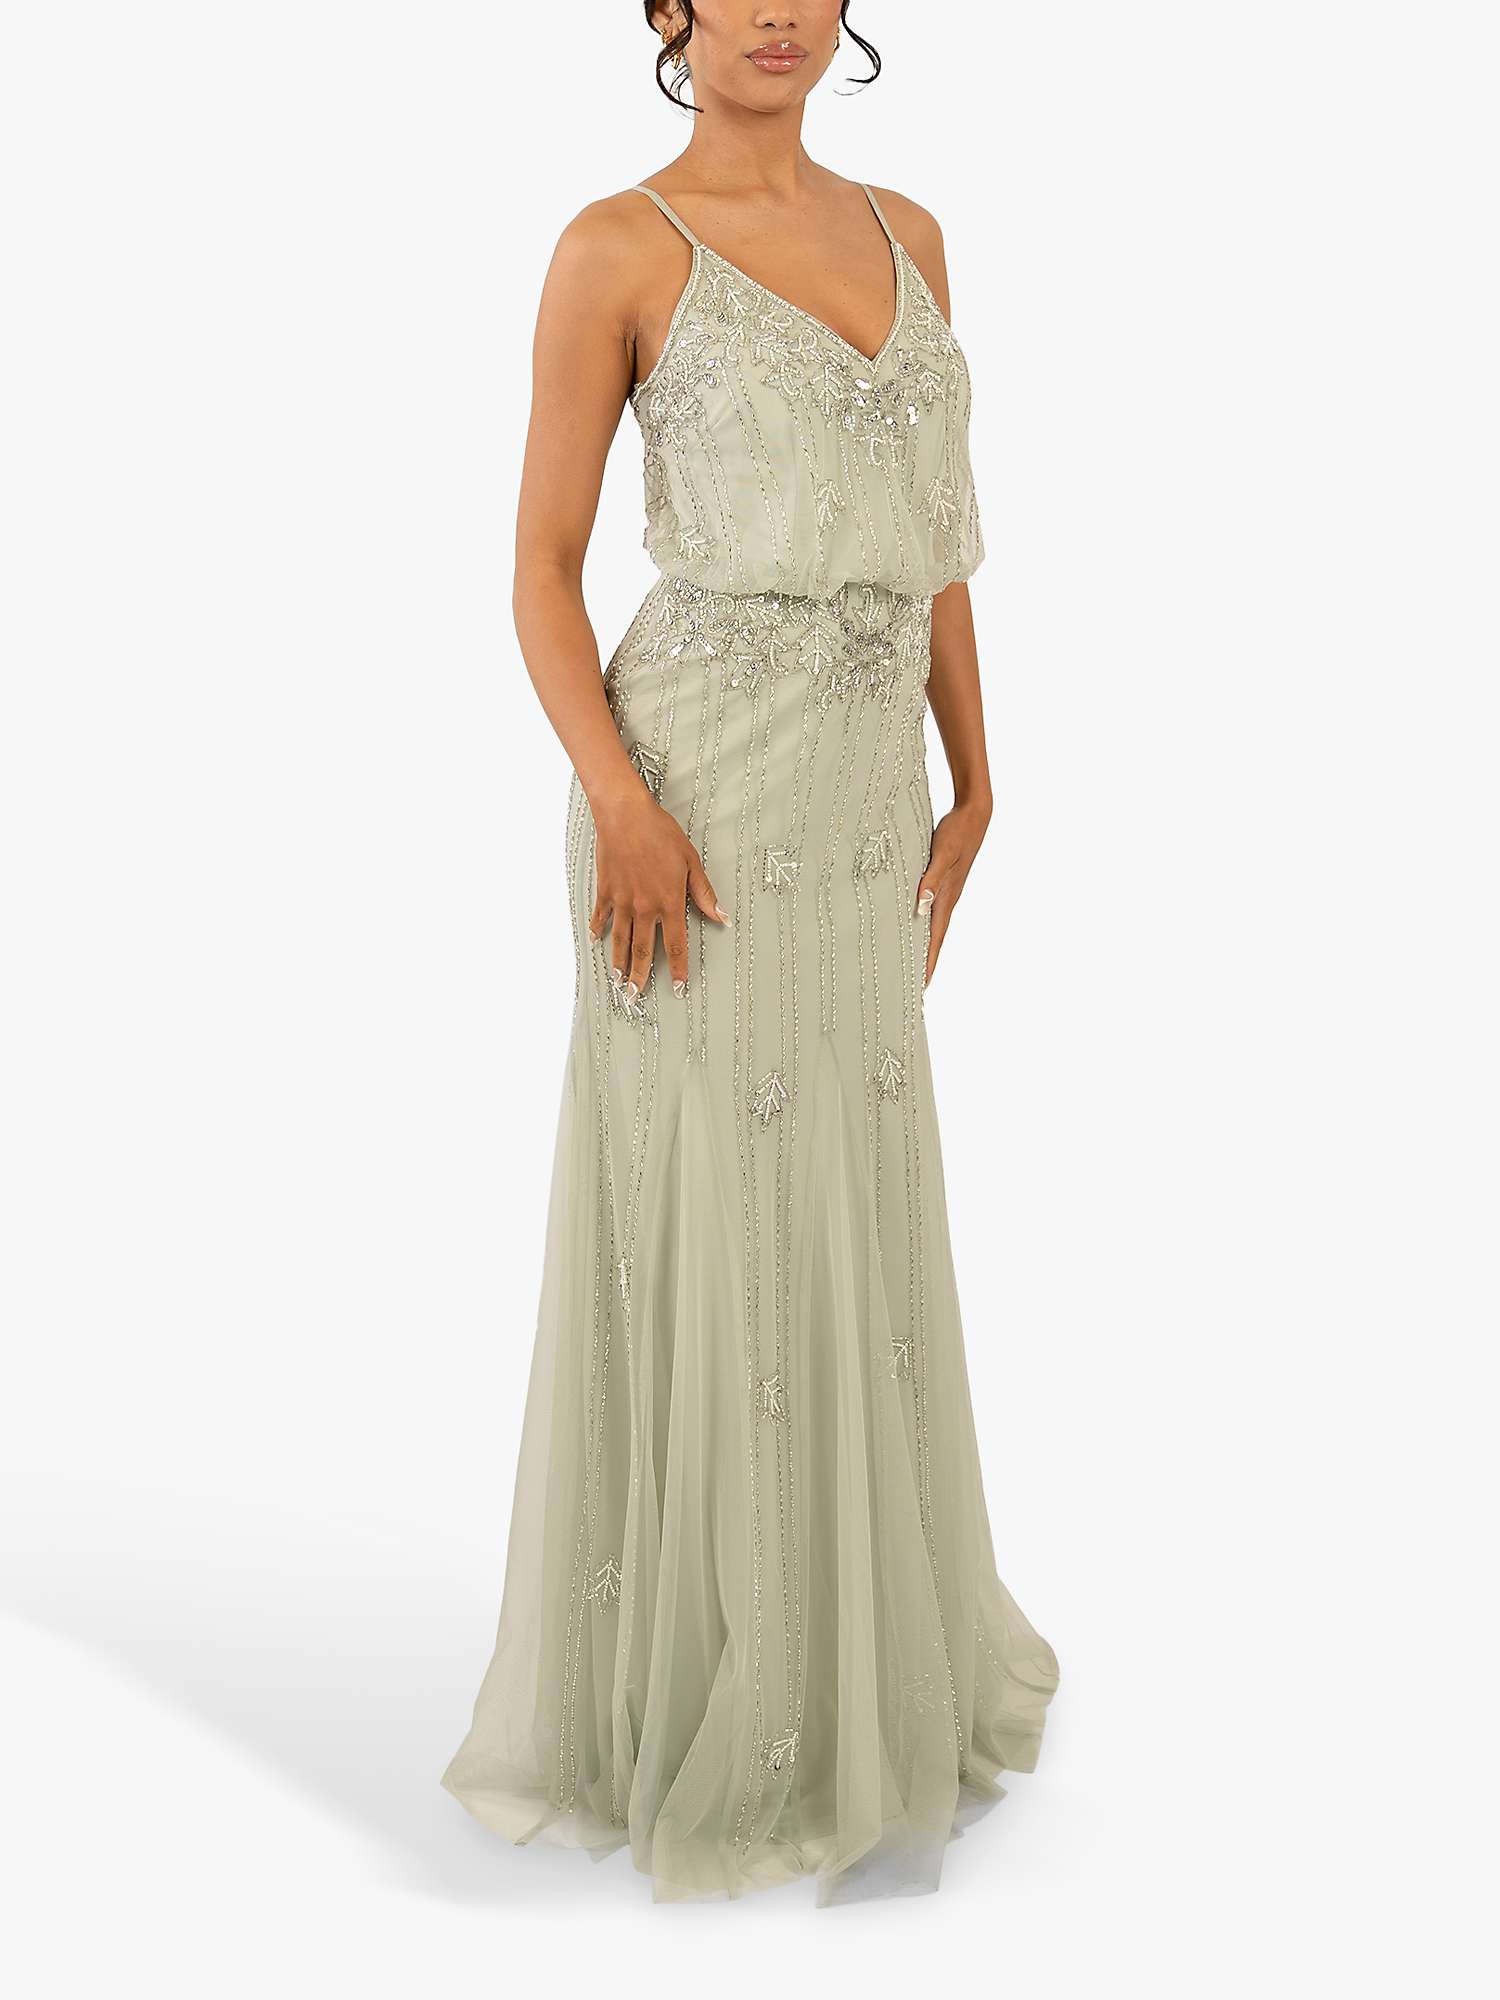 Buy Lace & Beads Keeva Bead Embellished Maxi Dress Online at johnlewis.com